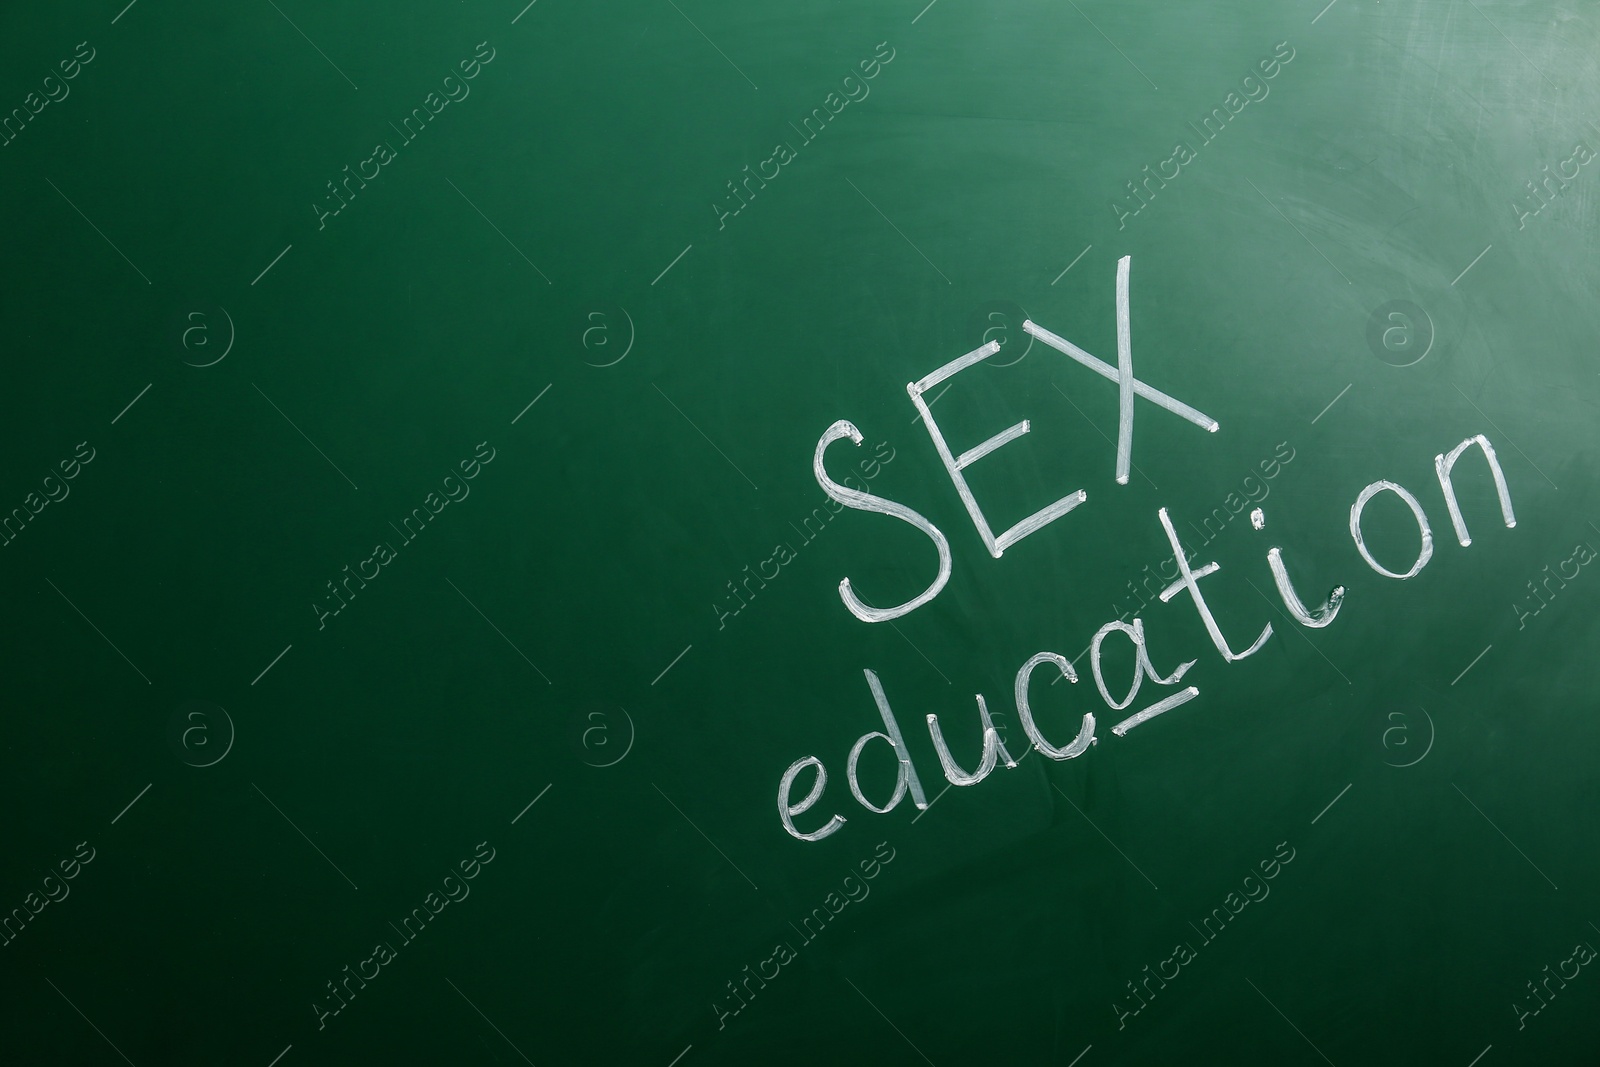 Photo of Phrase "SEX EDUCATION" written on green chalkboard. Space for text